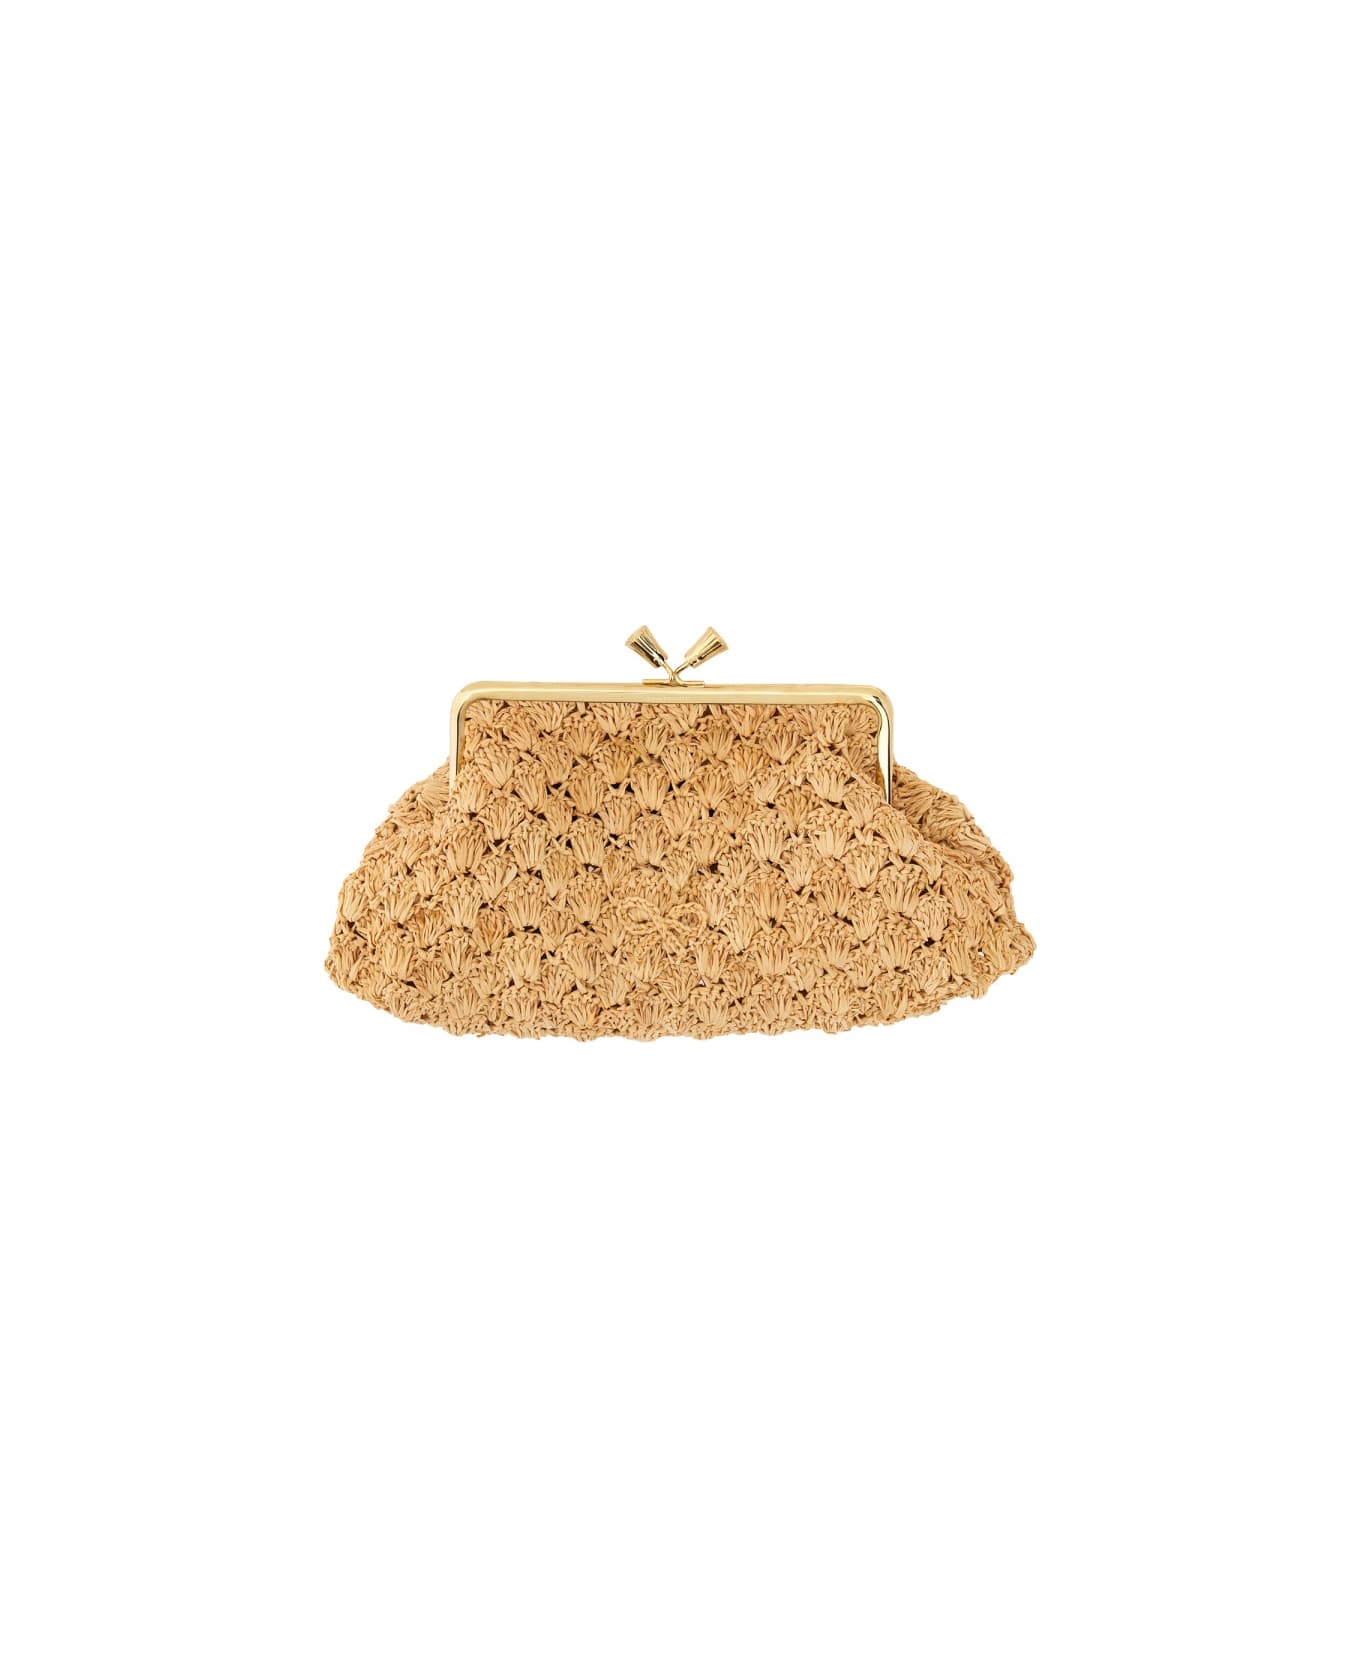 Anya Hindmarch Clutch "maud" Large - BEIGE クラッチバッグ